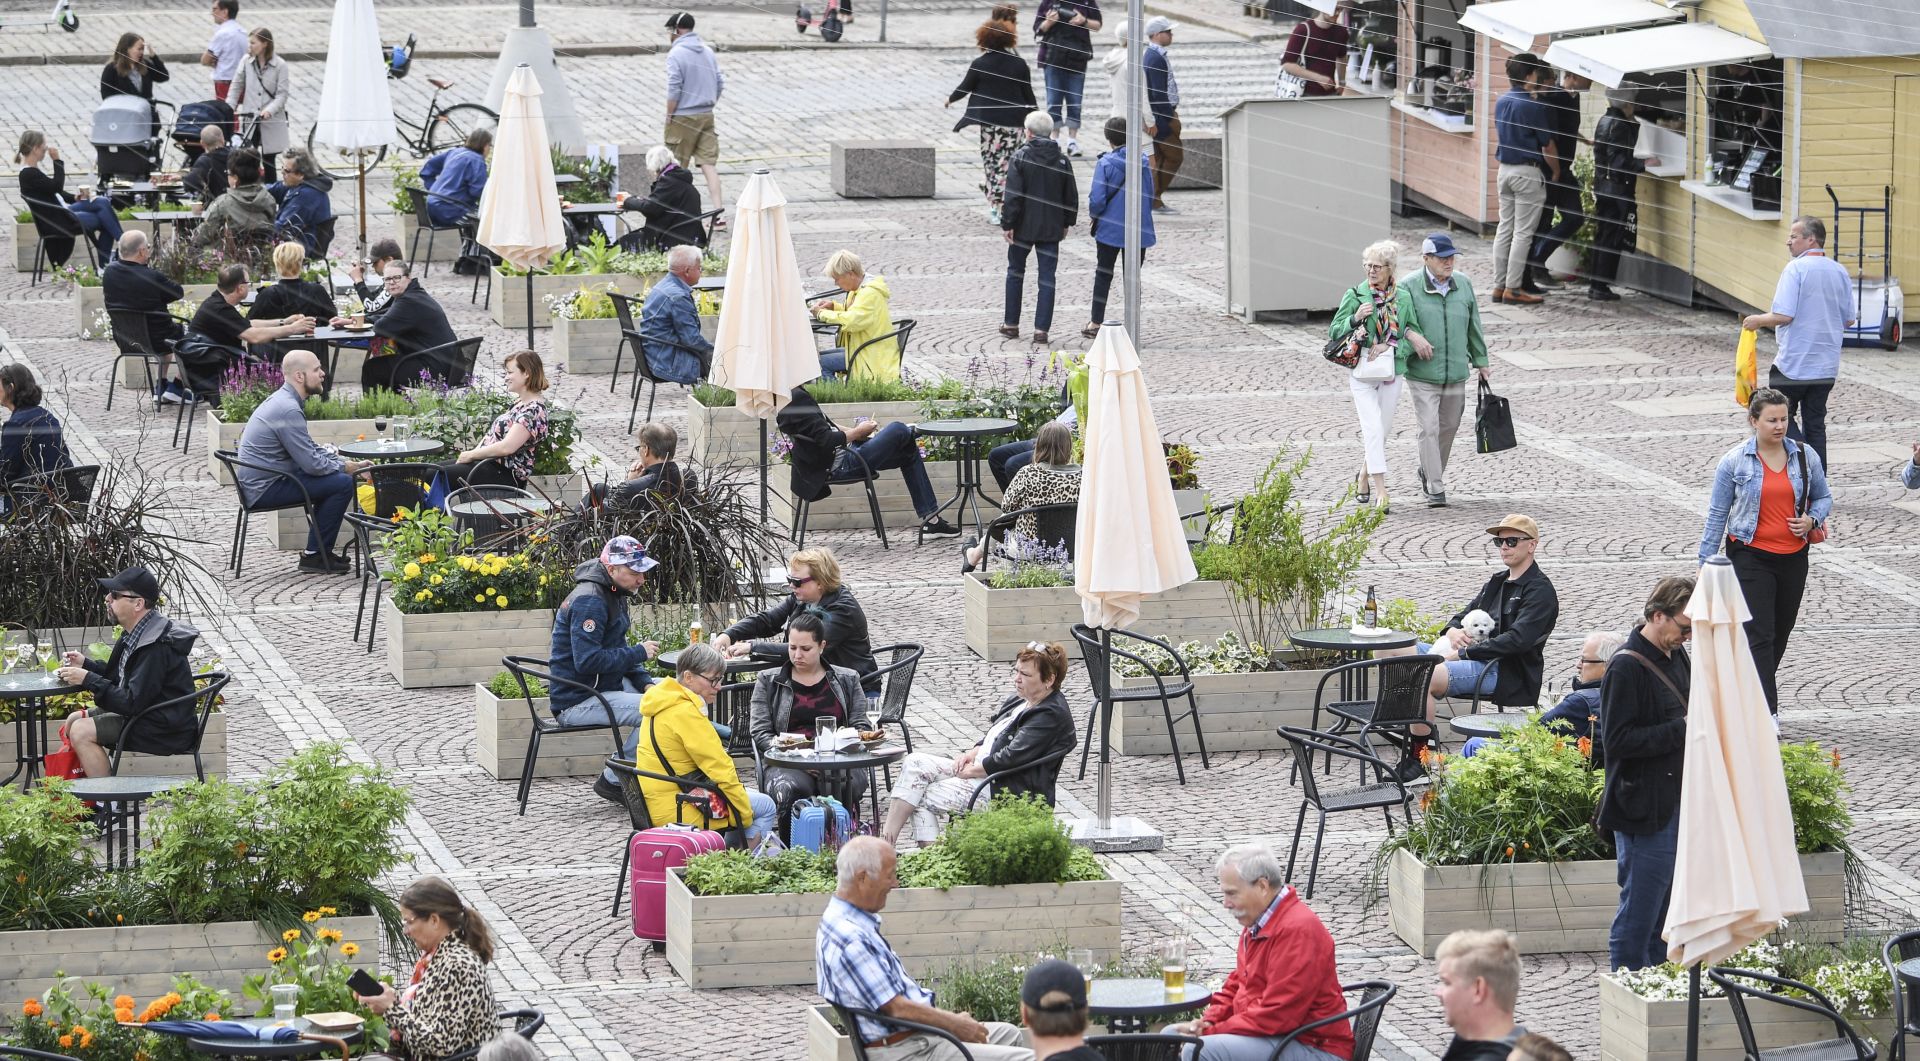 epa08520262 People sit on the Super Terrace that has been opened at Senate Square in Helsinki, Finland, 01 July 2020. It provides seating for 480 people and a number of pop-up restaurants to be introduced to the square as a means of allowing safer dining in the age of COVID-19. The terrace is open until the end of August 2020.  EPA/KIMMO BRANDT